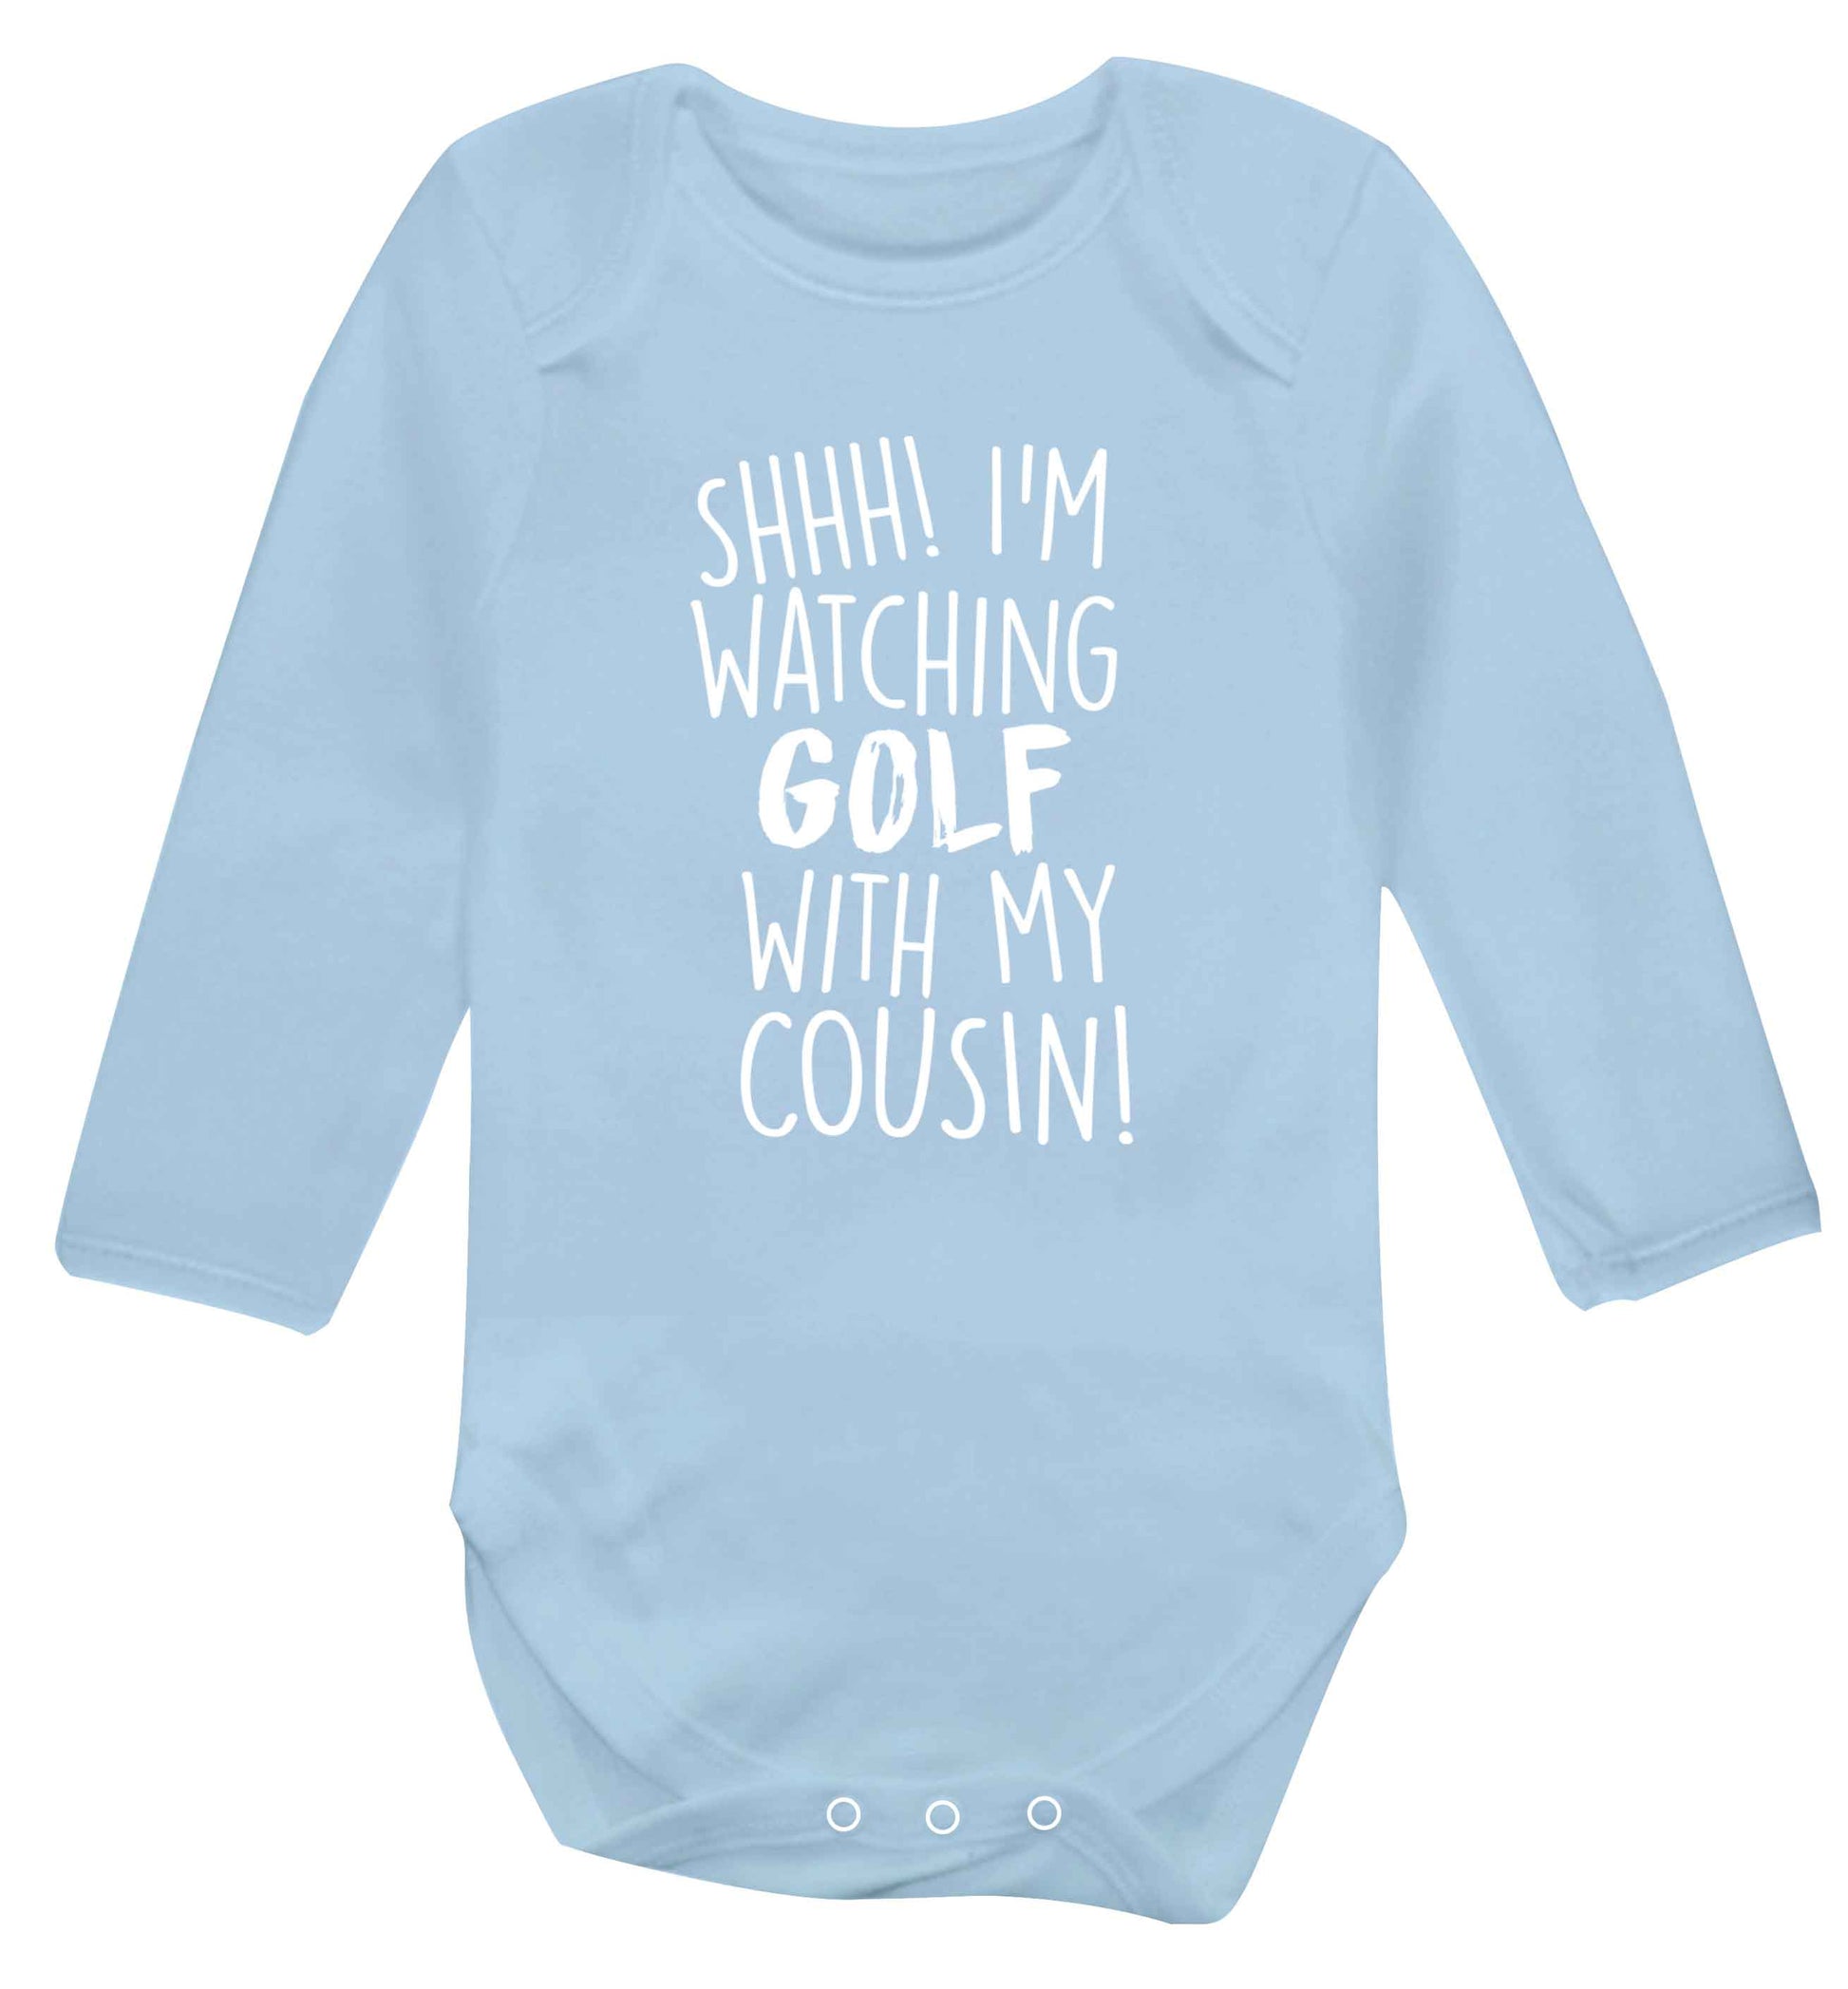 Shh I'm watching golf with my cousin Baby Vest long sleeved pale blue 6-12 months